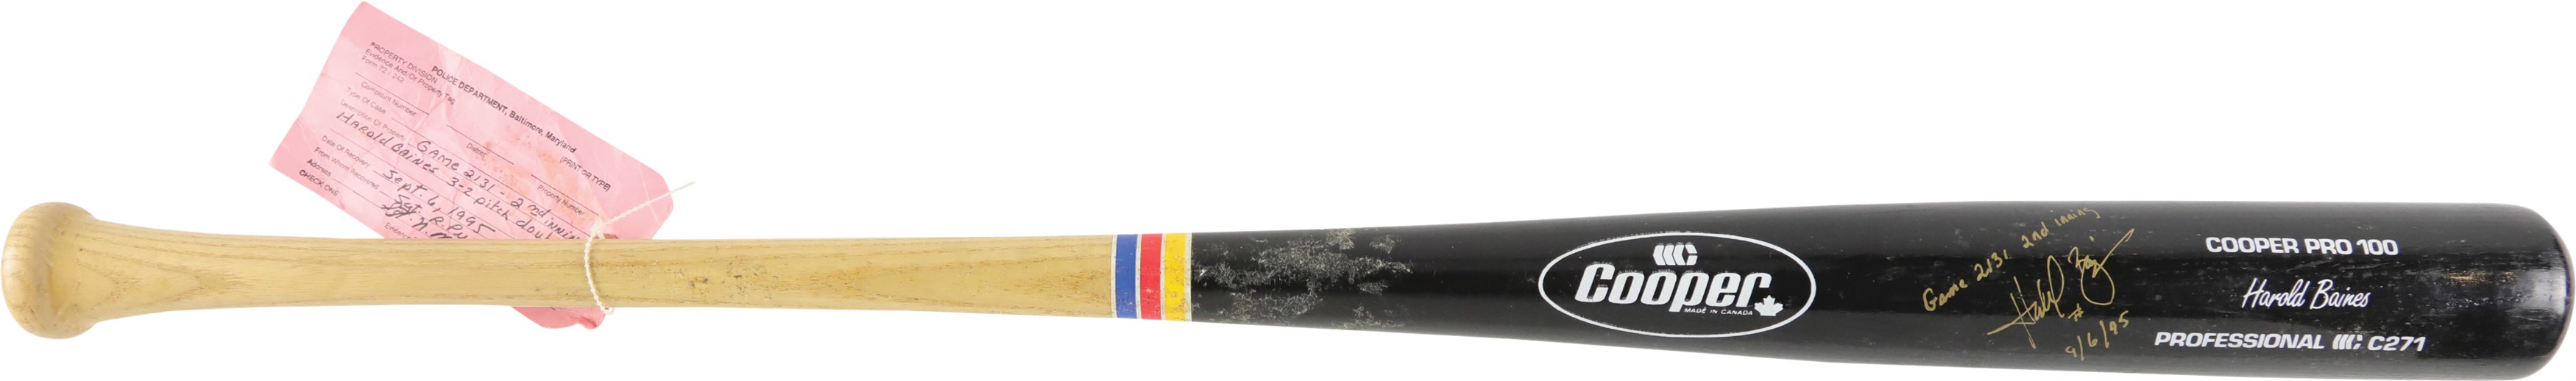 - September 6, 1995, Harold Baines Signed Game Used Bat from Cal Ripken's Record Breaking Game - Inscribed "Game 2131 2nd Inning"